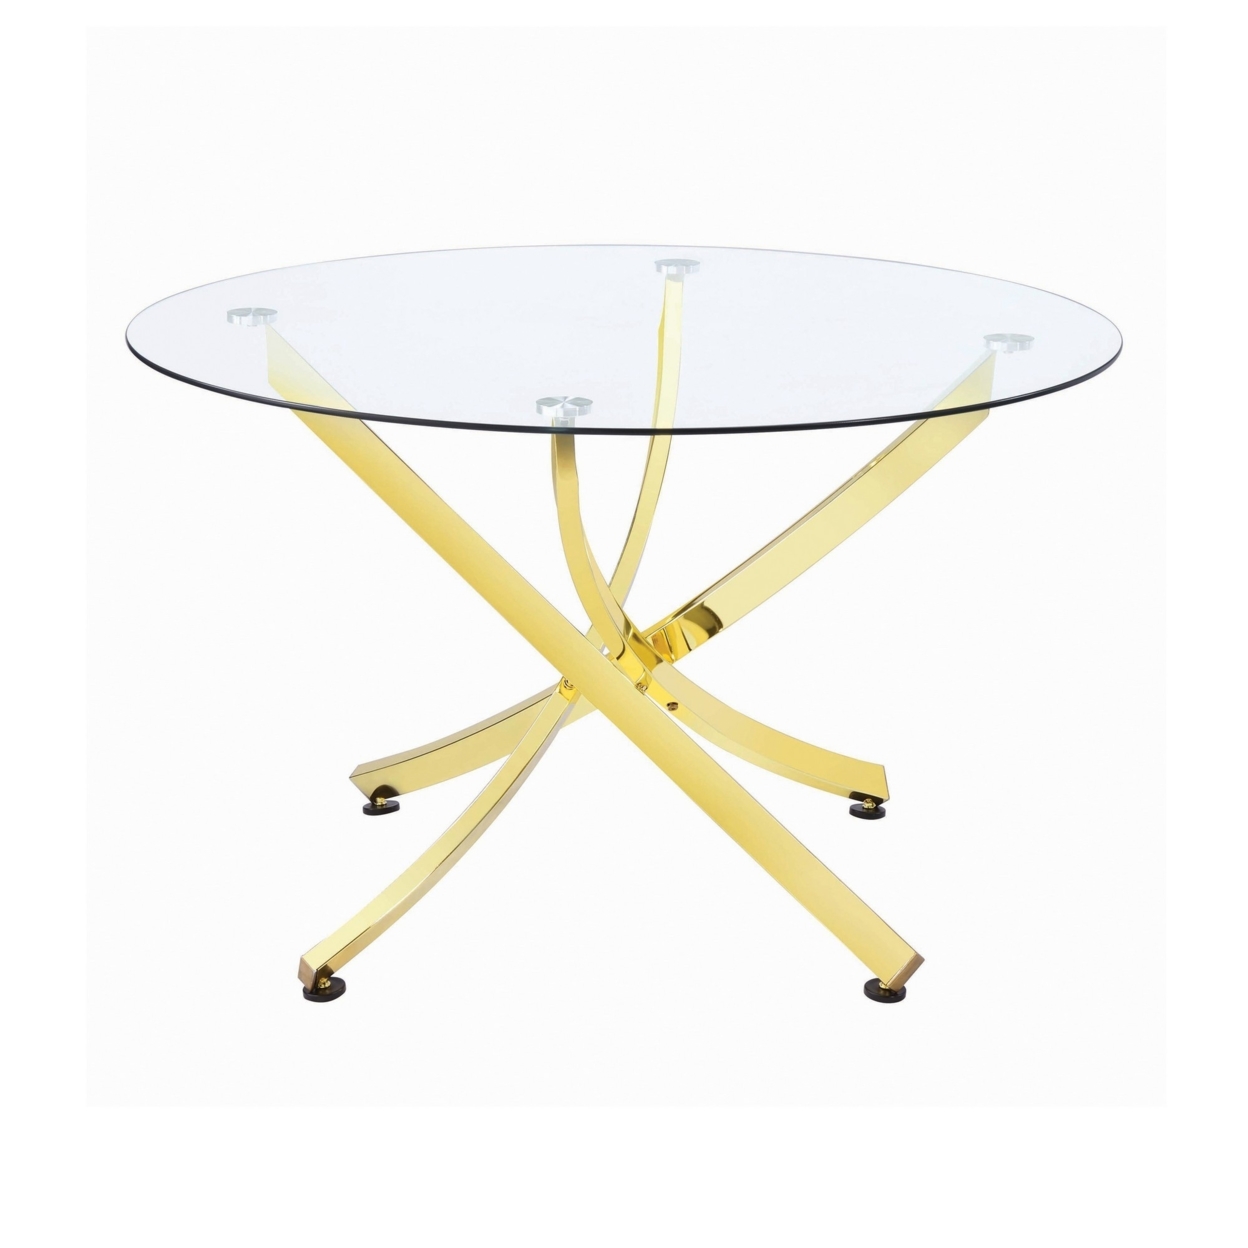 Dining Table With Glass Top And Curved Design Metal Base, Gold- Saltoro Sherpi